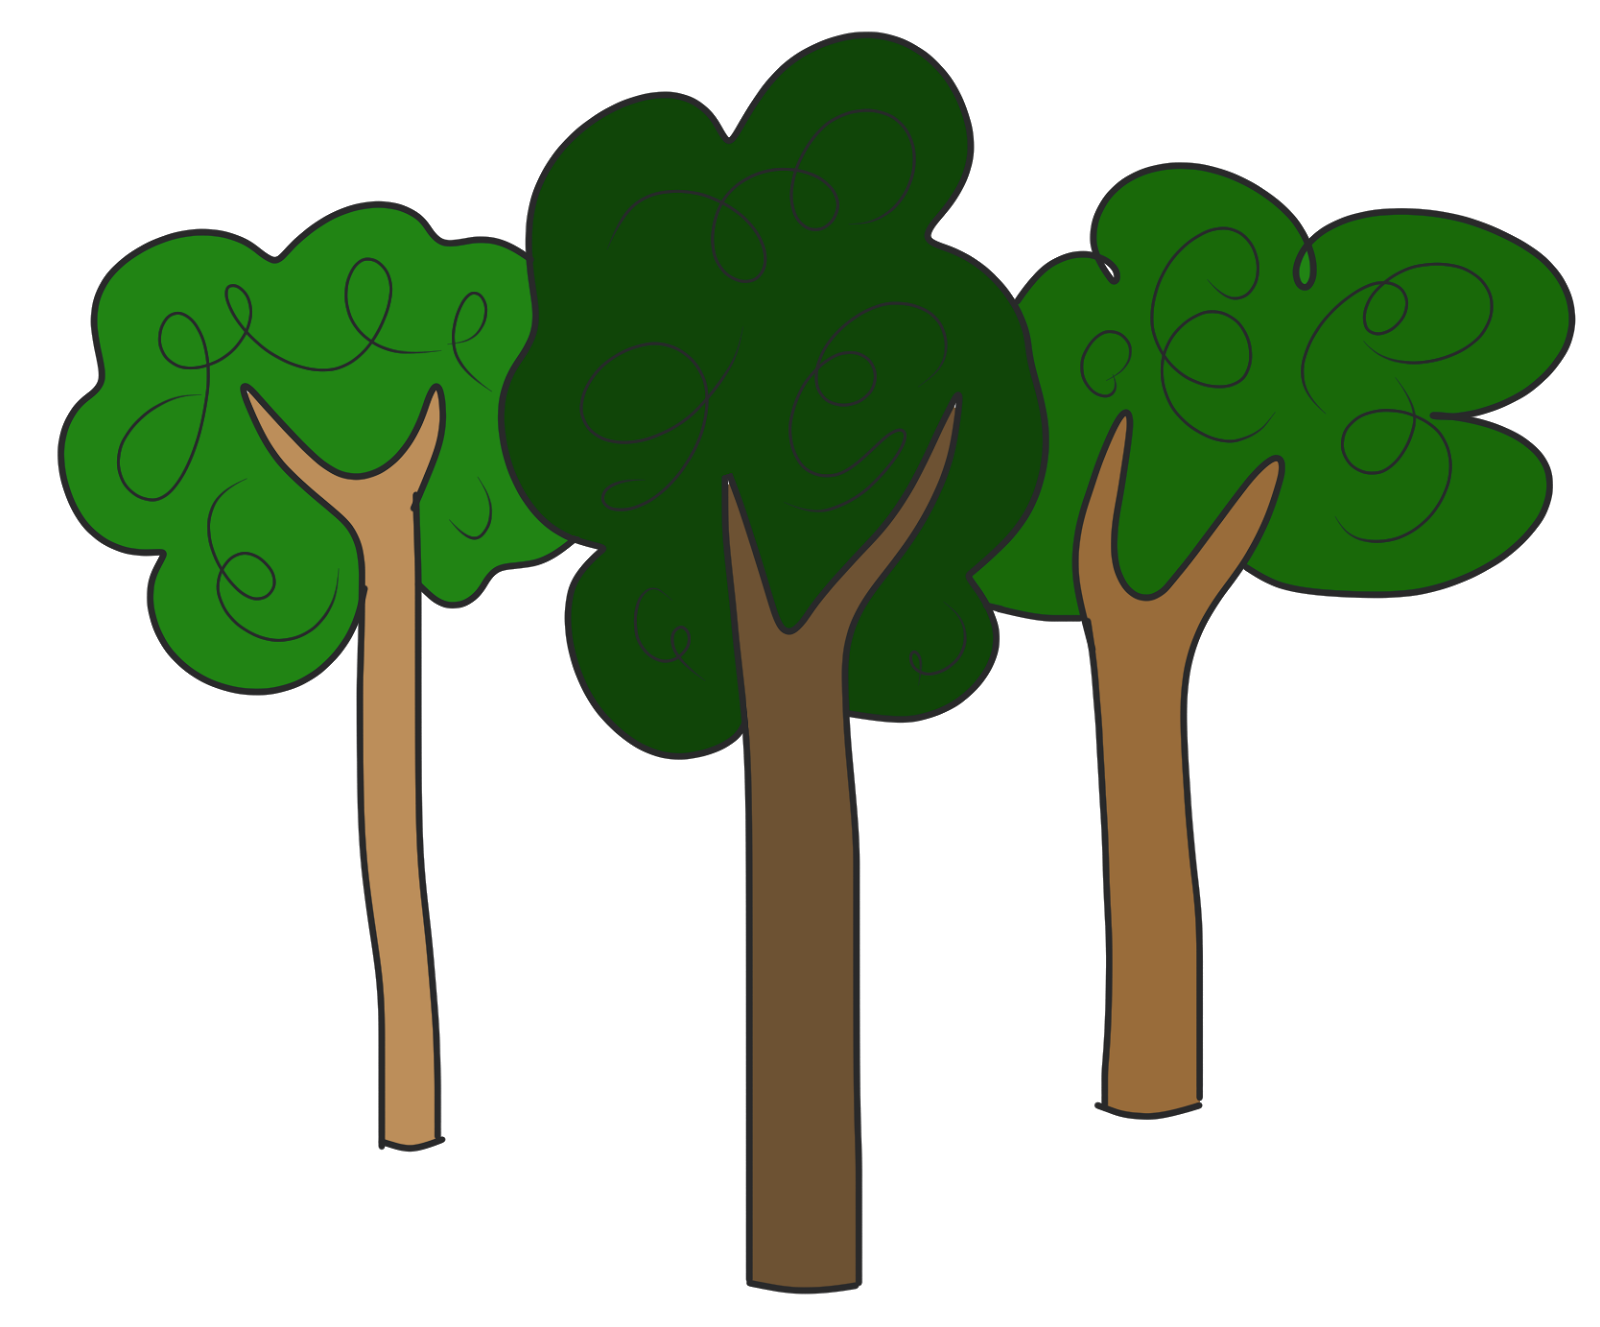 Tree house at getdrawings. Houses clipart green